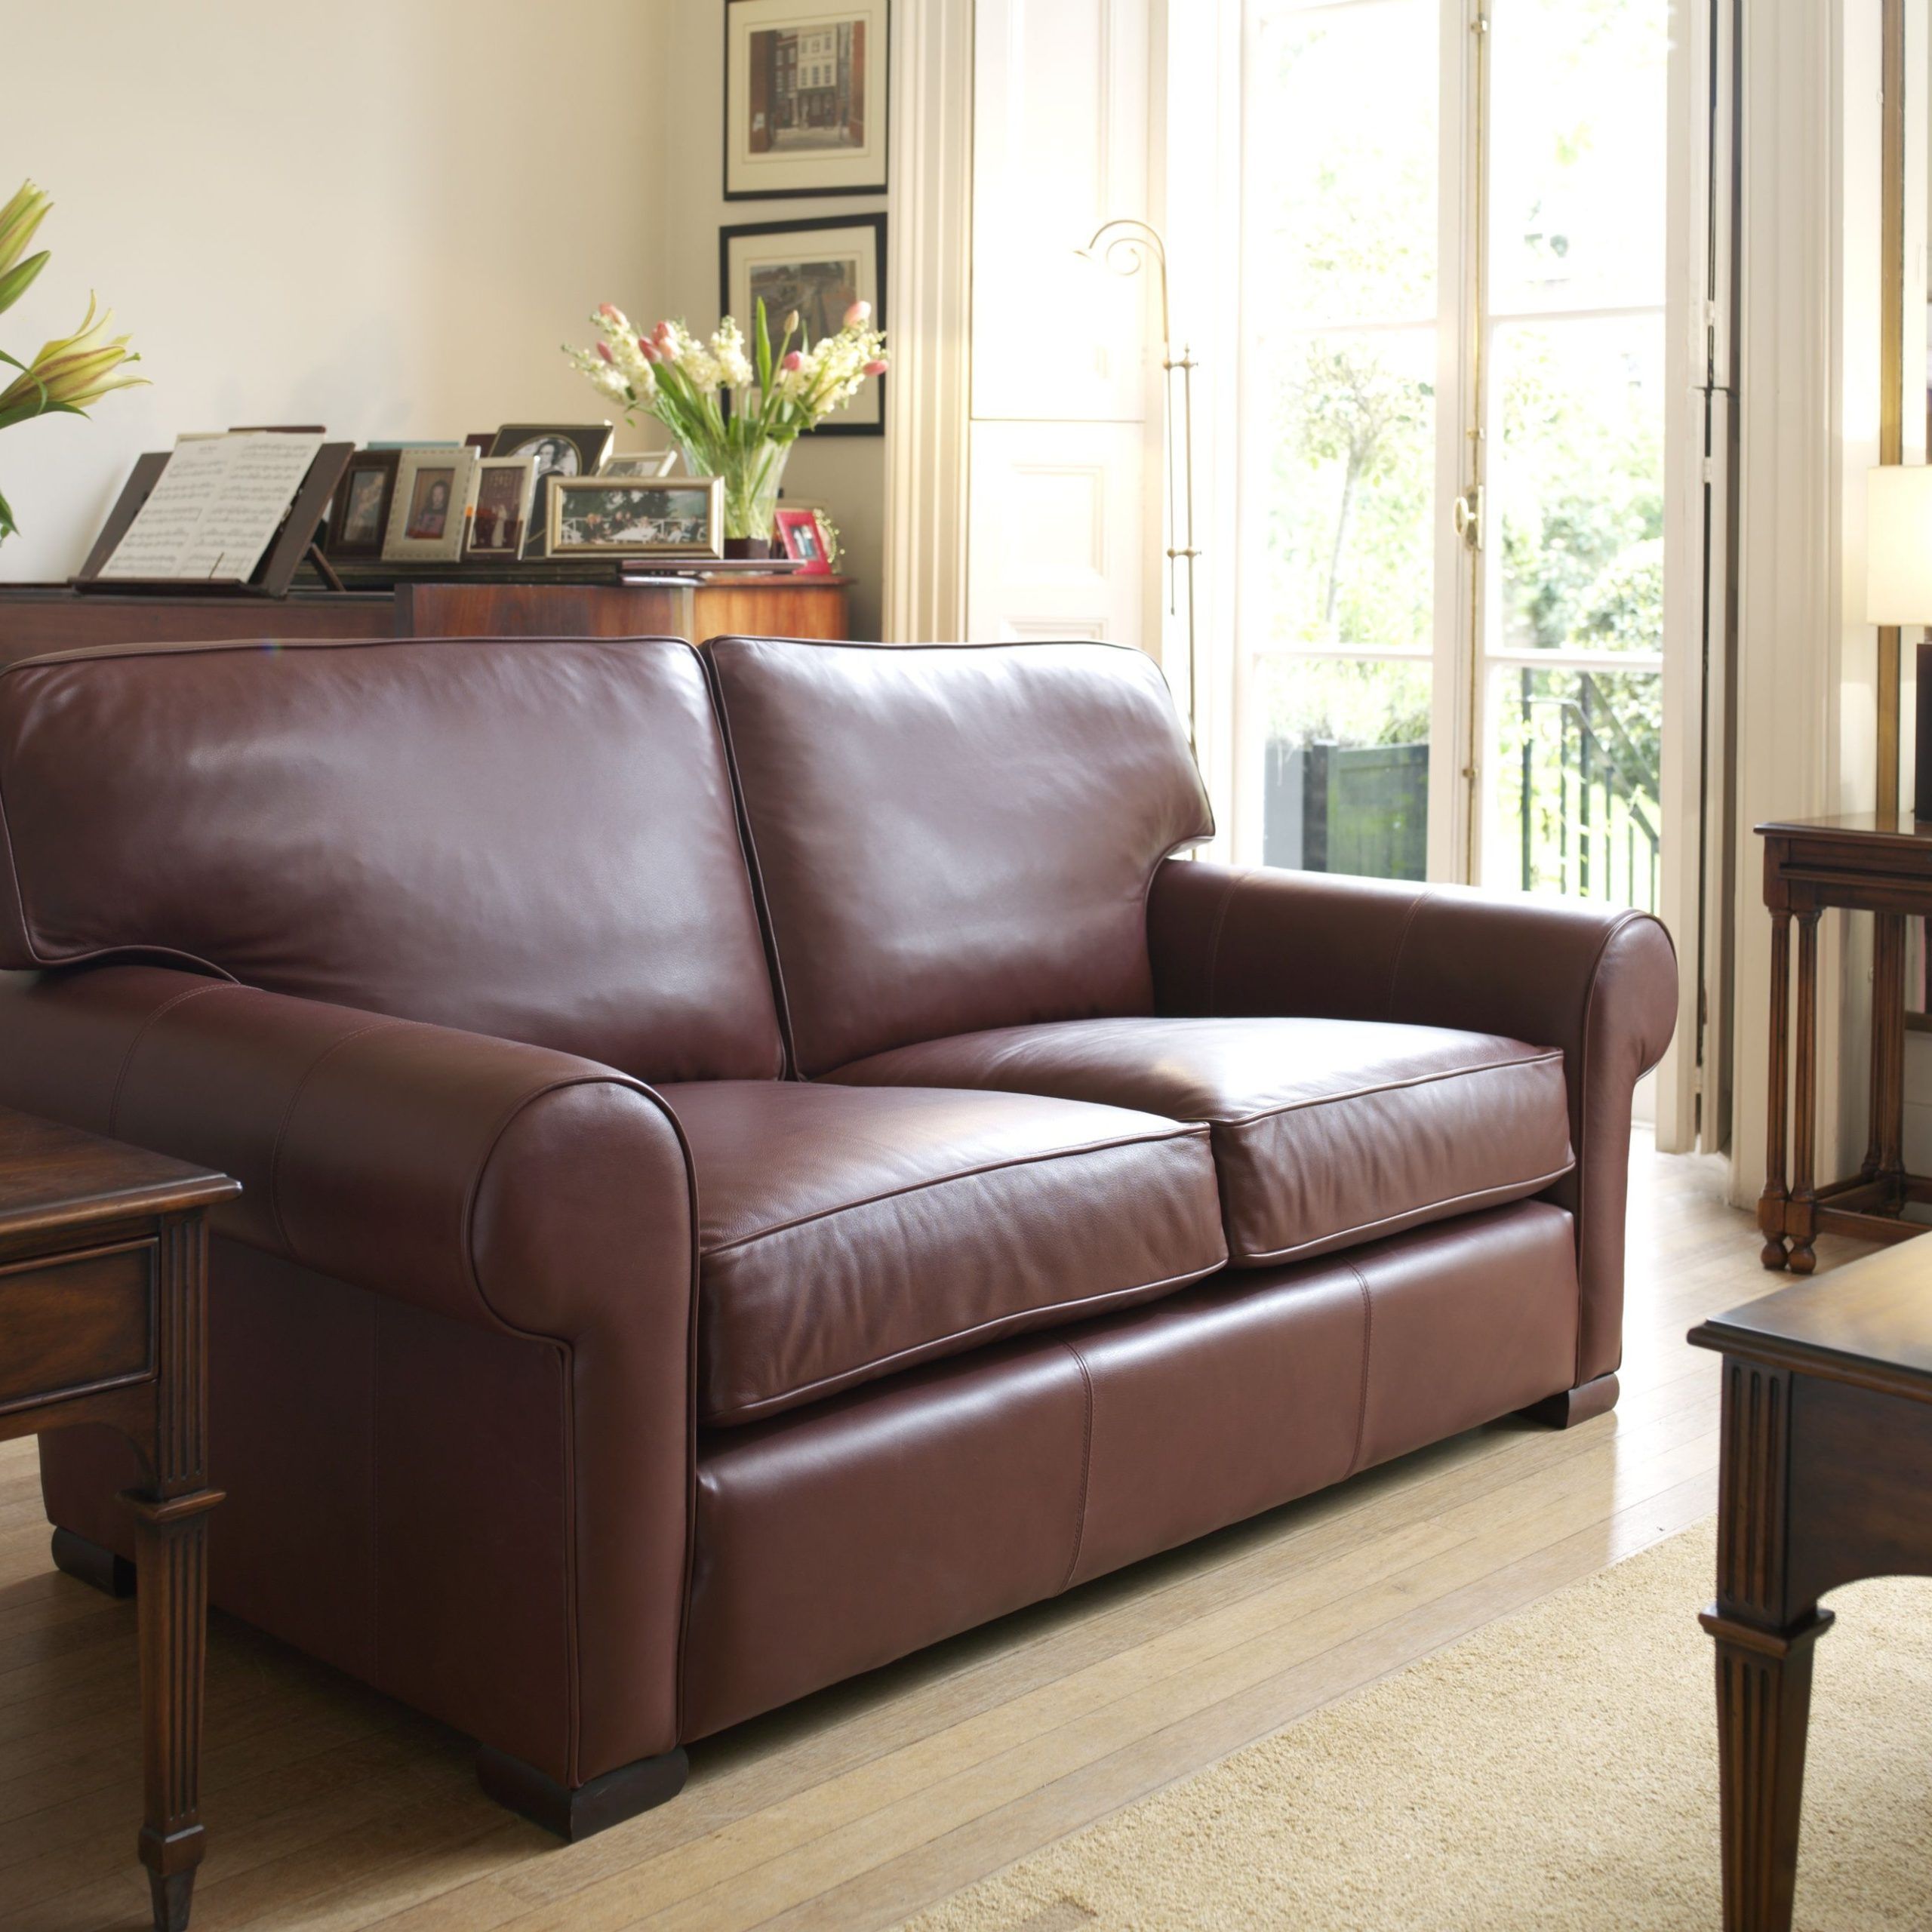 Our Best Selling Imogen Range Is Also Available In Leather (View 1 of 10)